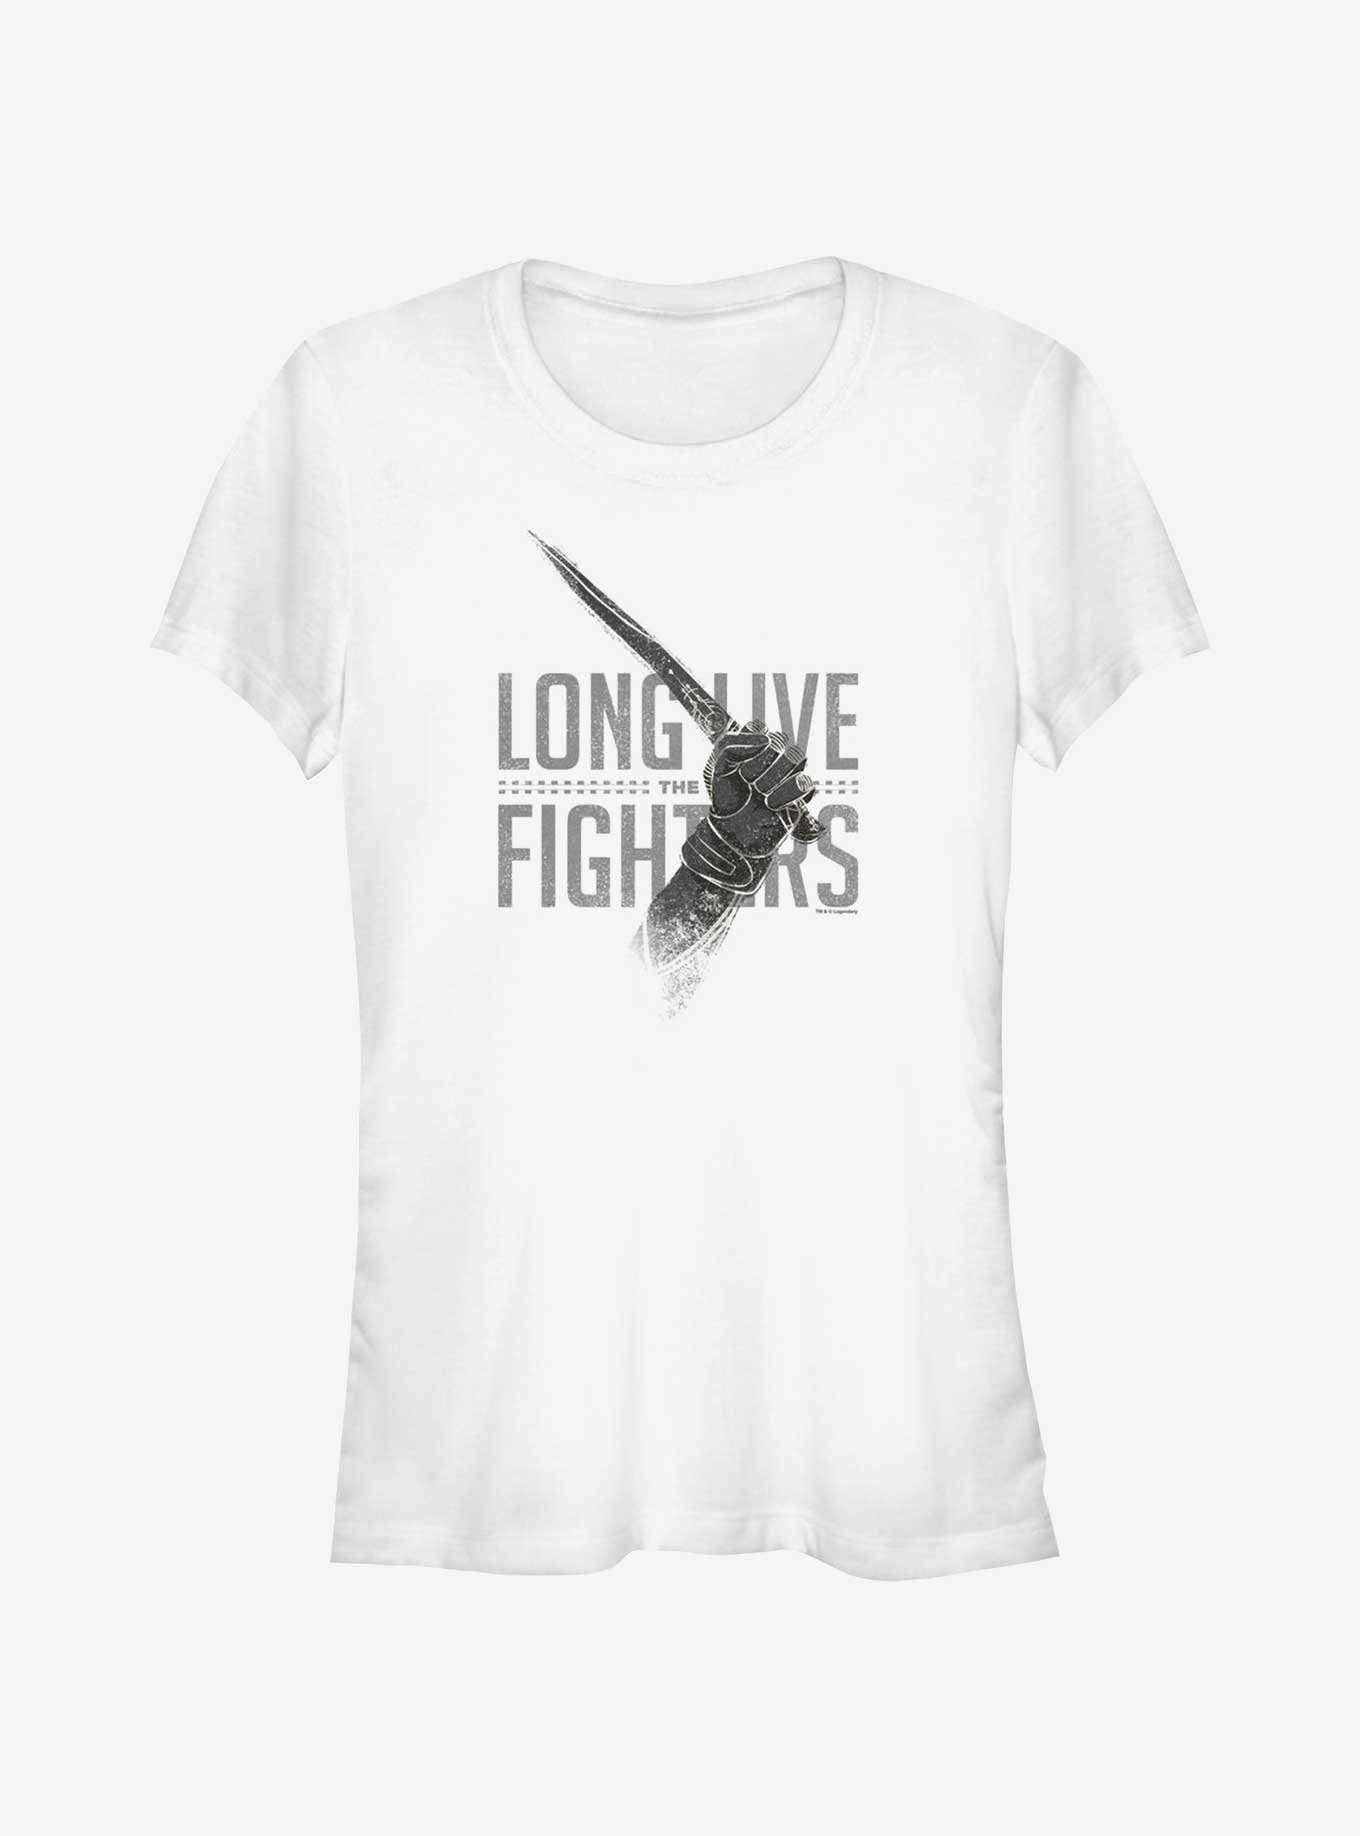 Dune: Part Two Long Live The Fighters Girls T-Shirt, , hi-res